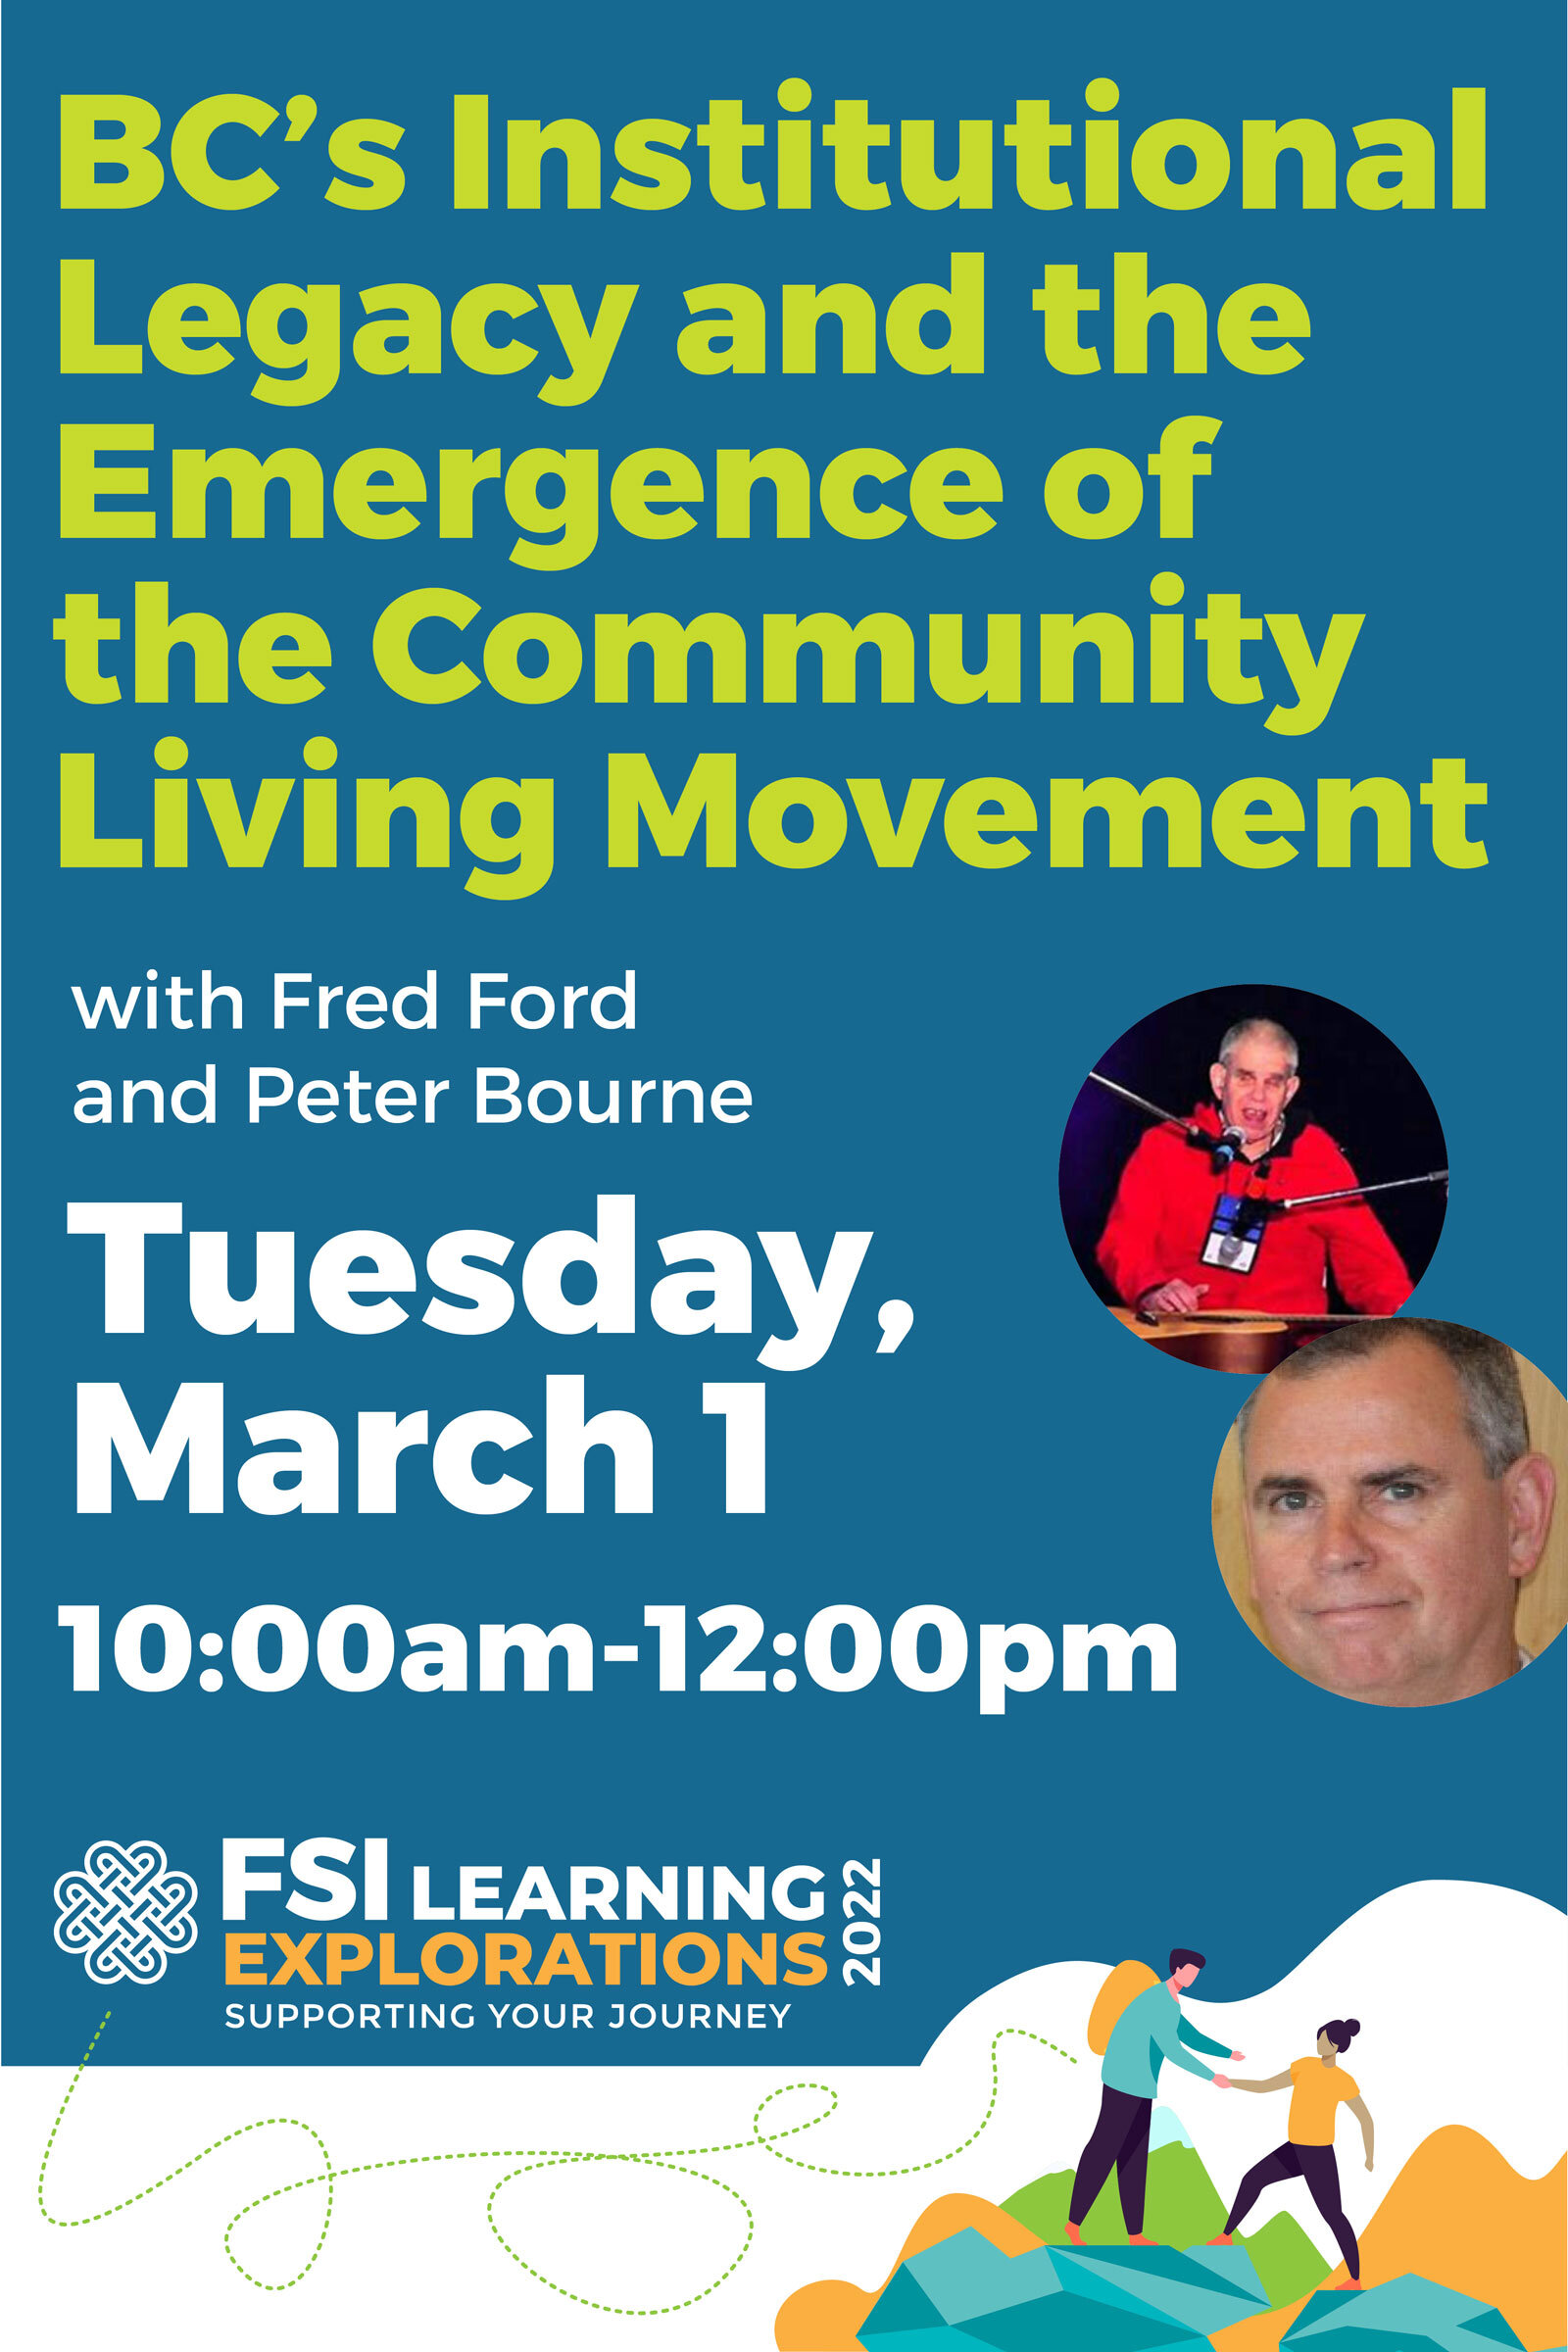 FSI Learning Explorations - BC’s Institutional Legacy and the Emergence of the Community Living Movement